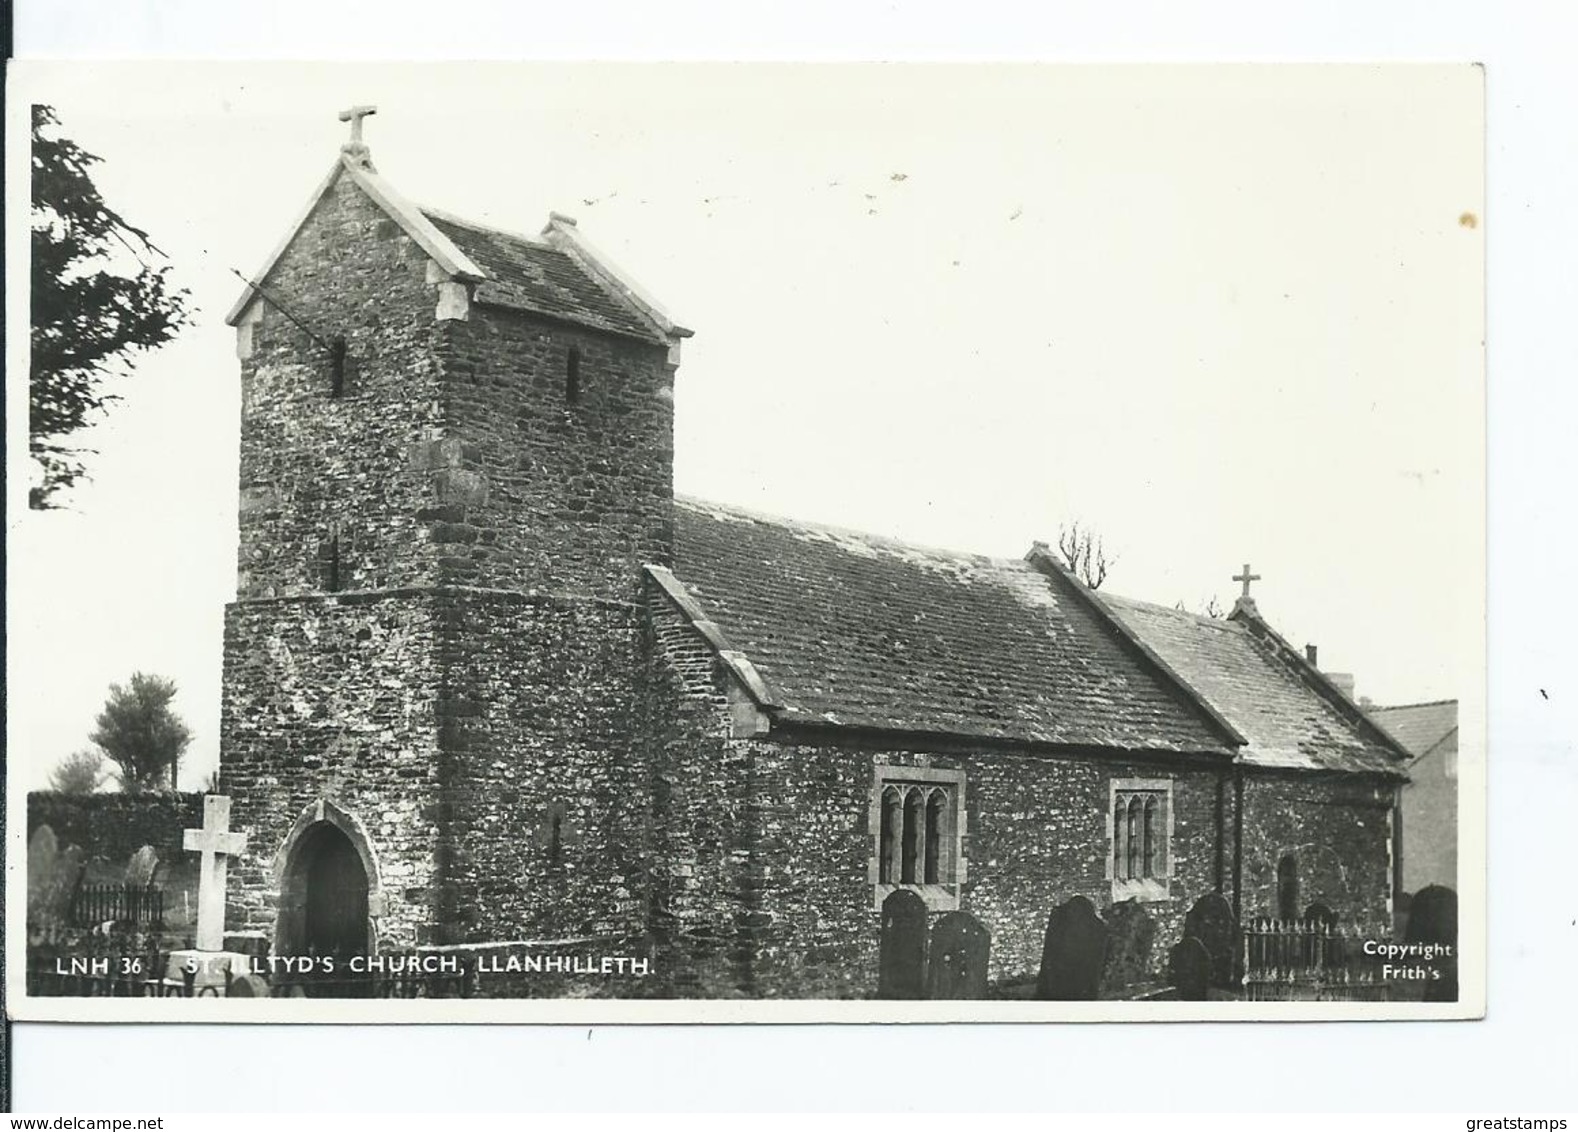 Postcard  Wales Llanhilleth Rp St Illyd's Church Unused Monmouthshire   Frith's - Monmouthshire